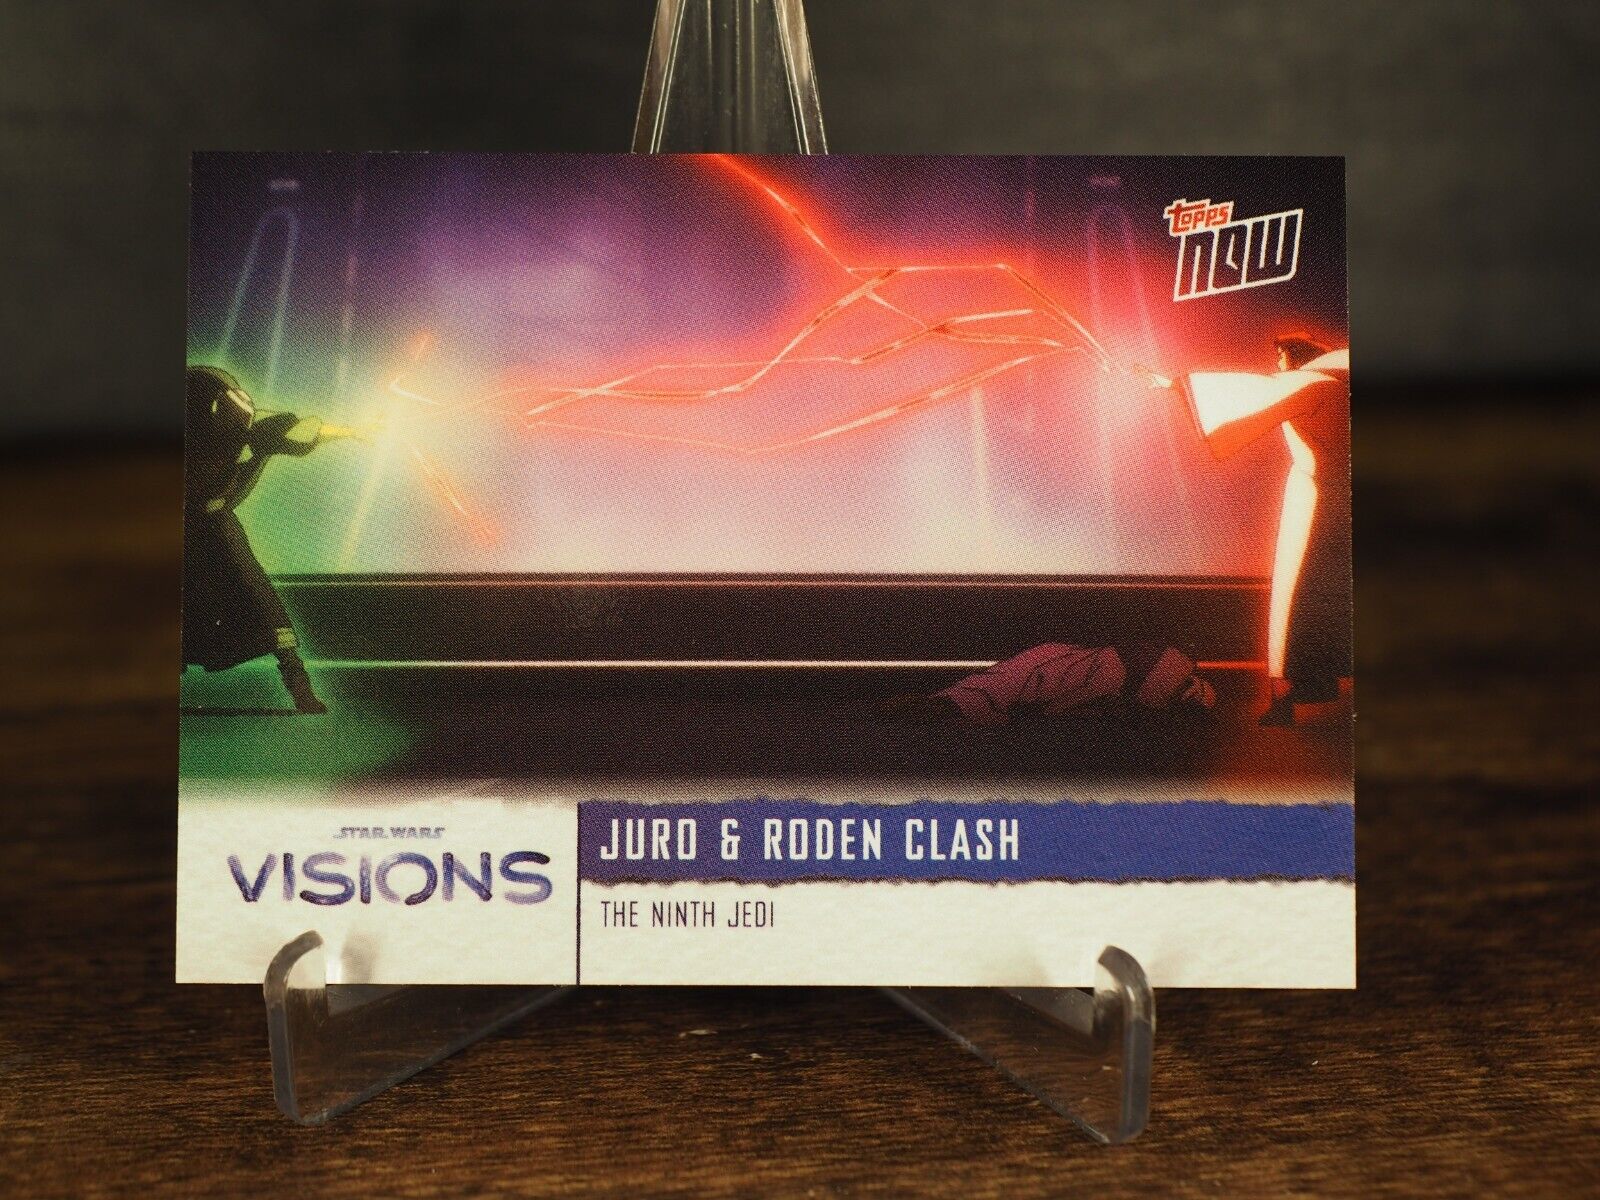 2021 Topps Now Star Wars Visions The Ninth Jedi Juro & Roden Clash #4 PR: 474